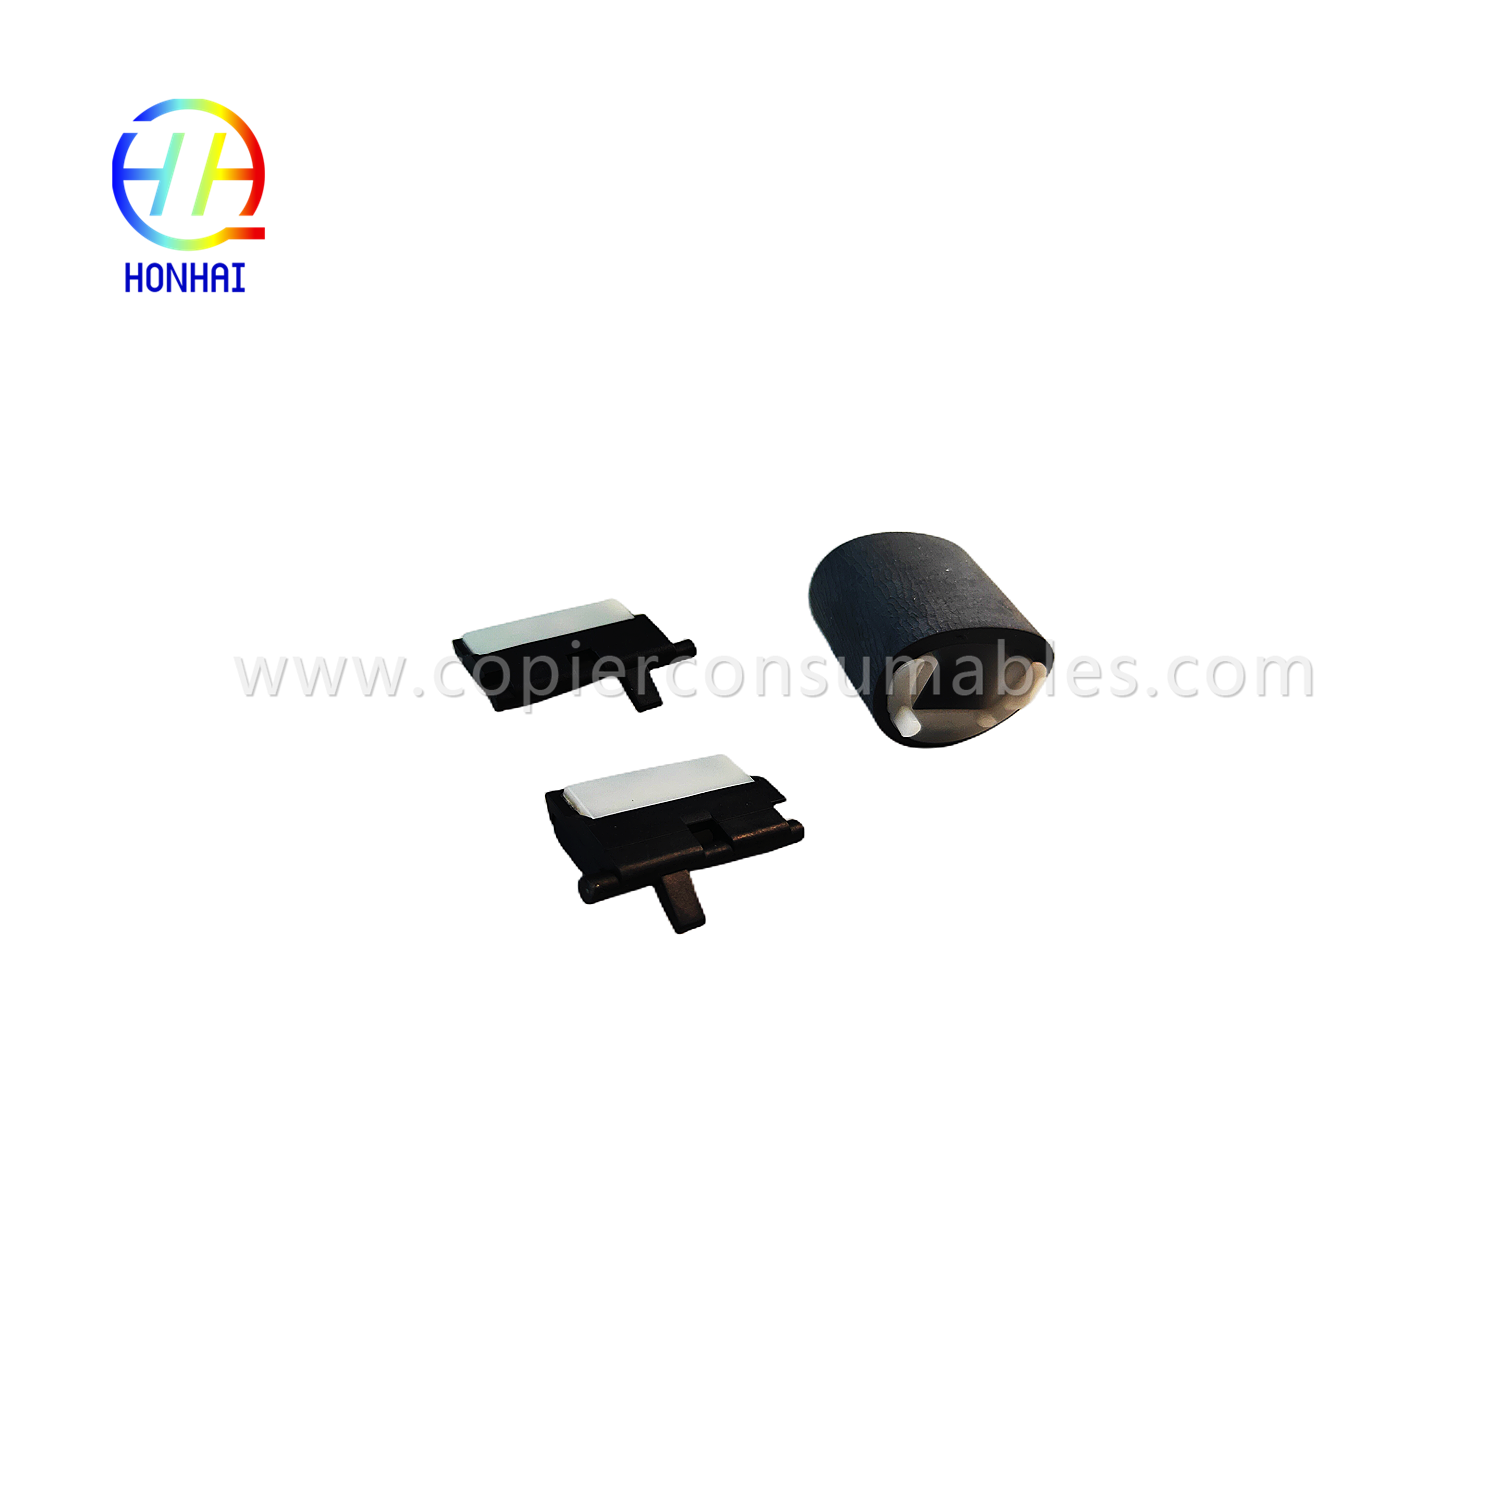 https://www.copierconsumables.com/paper-pickup-roller-separates-pad%ef%bc%88set%ef%bc%89for-hp-pagewide-x585z-x451dn-x476dn-x551dw-x576dw-556dn-586- 452dn-477dn-552-577z-cb780-60012-продукт/